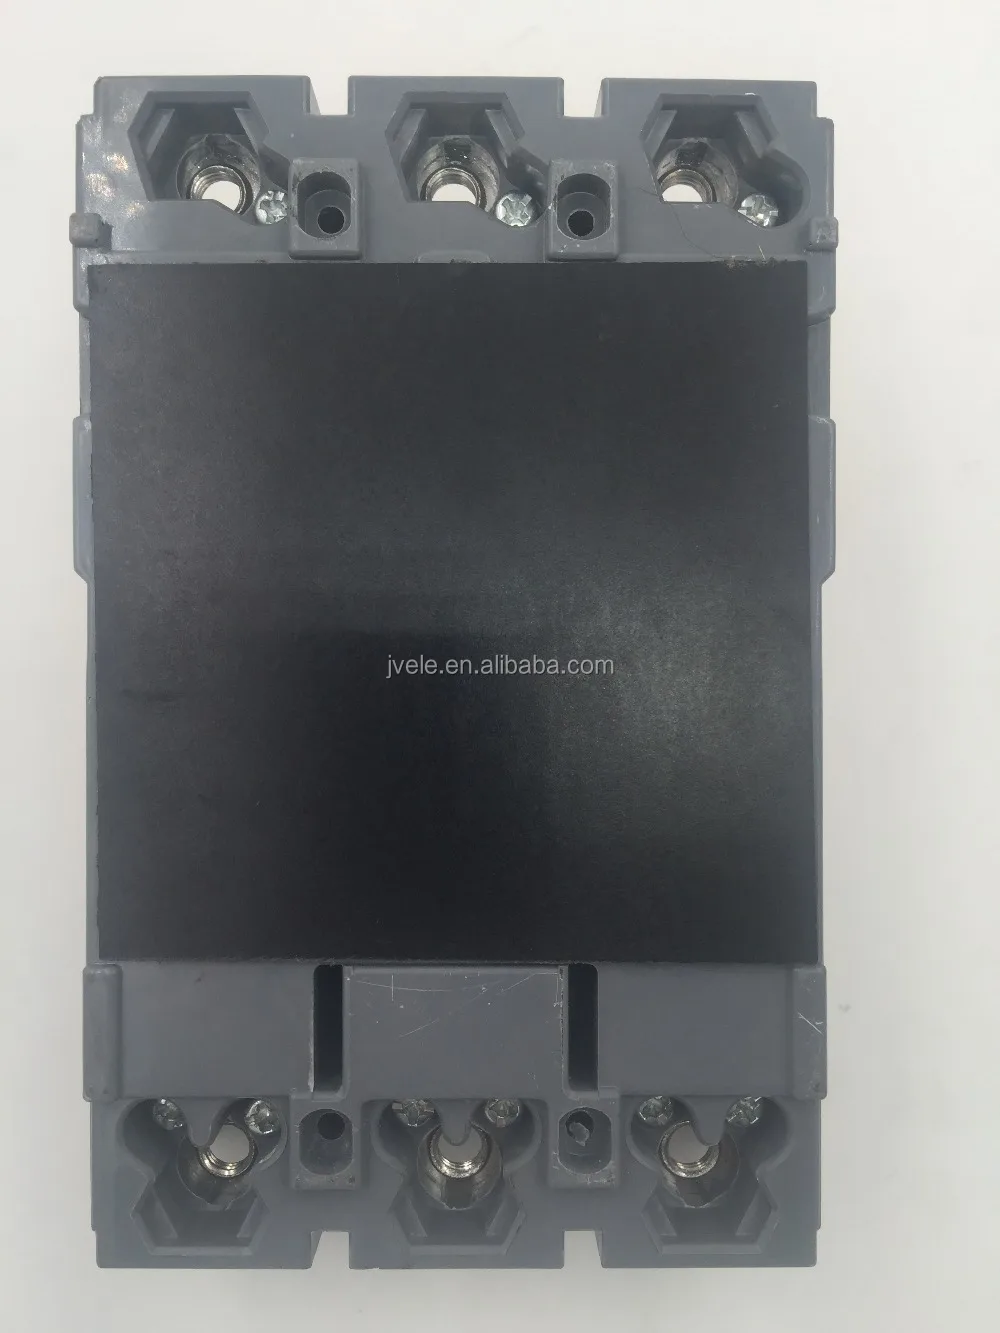 JVM7 ABE ABN ABS 203B 600V 225A Adjustable Low Voltage Molded Case Circuit Breaker/MCCB